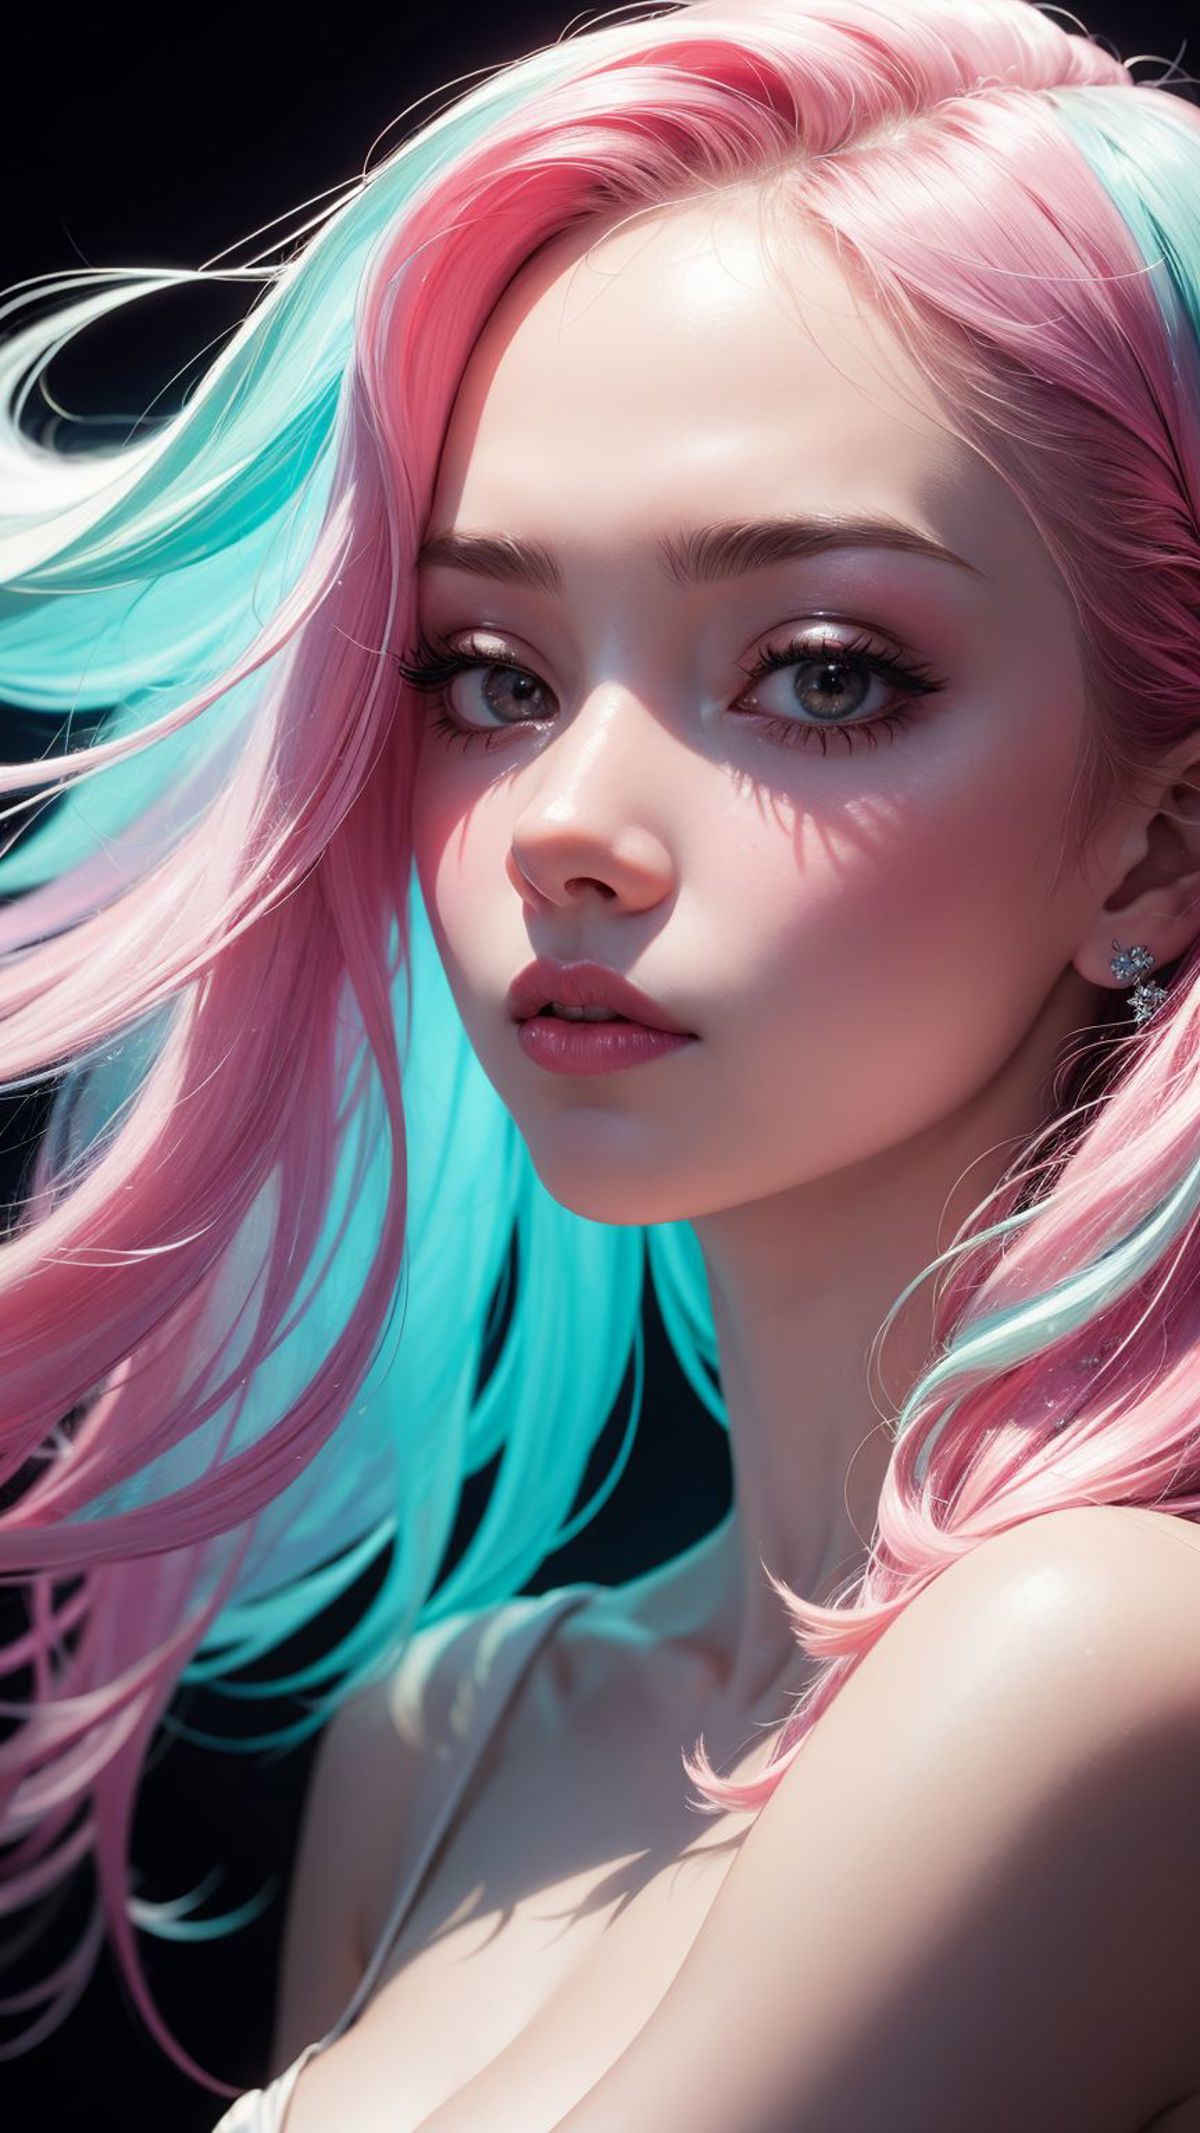 A girl with pink and blue hair has turquoise eyes, and is wearing makeup.